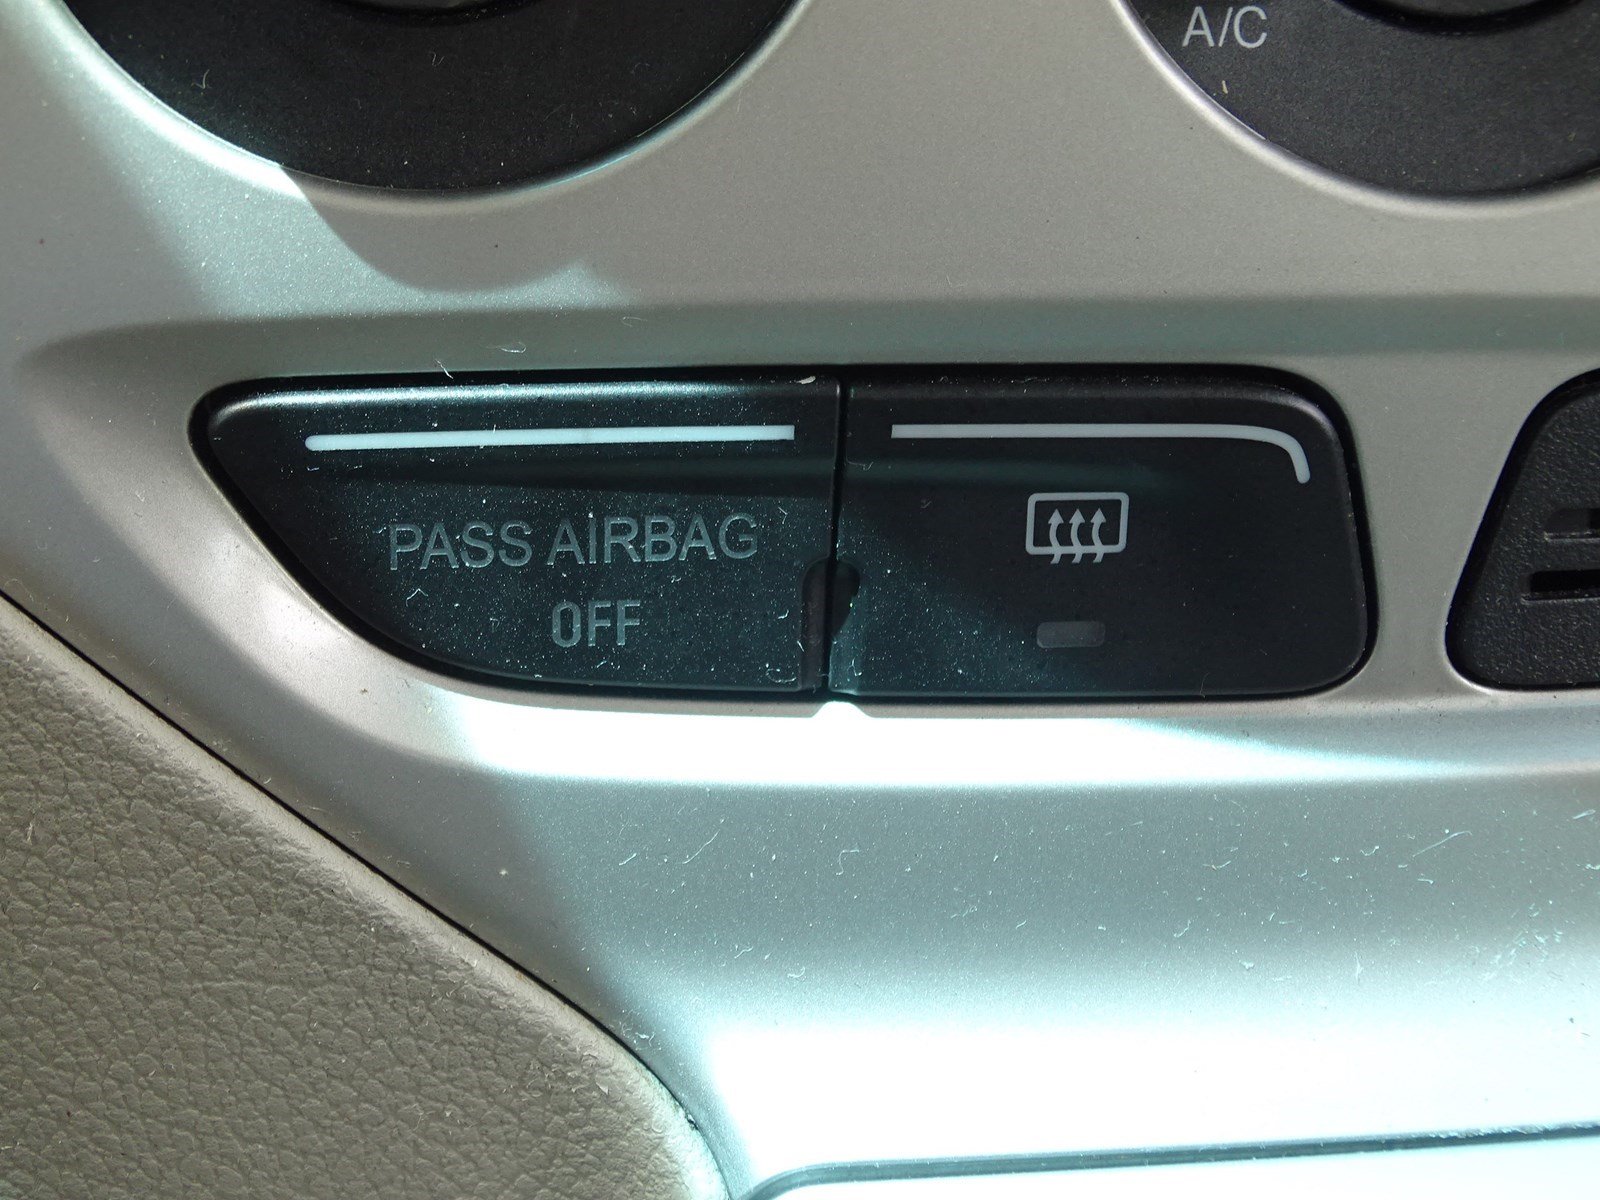 Pass airbag off ford focus How To Turn Passenger Airbag Off Ford Focus